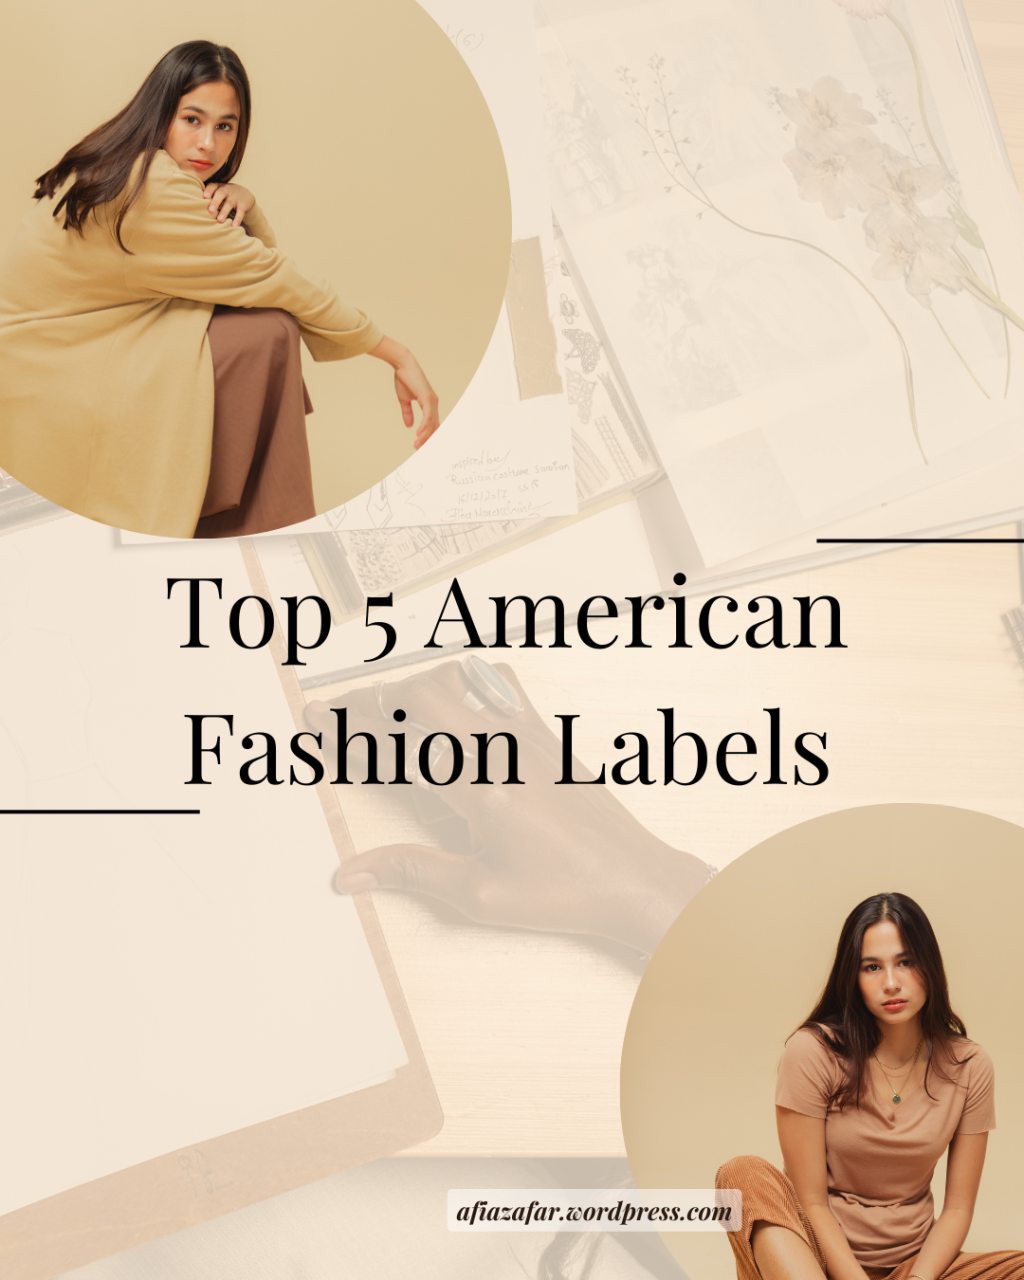 Redefine Your Style With Top 5 American Fashion Labels